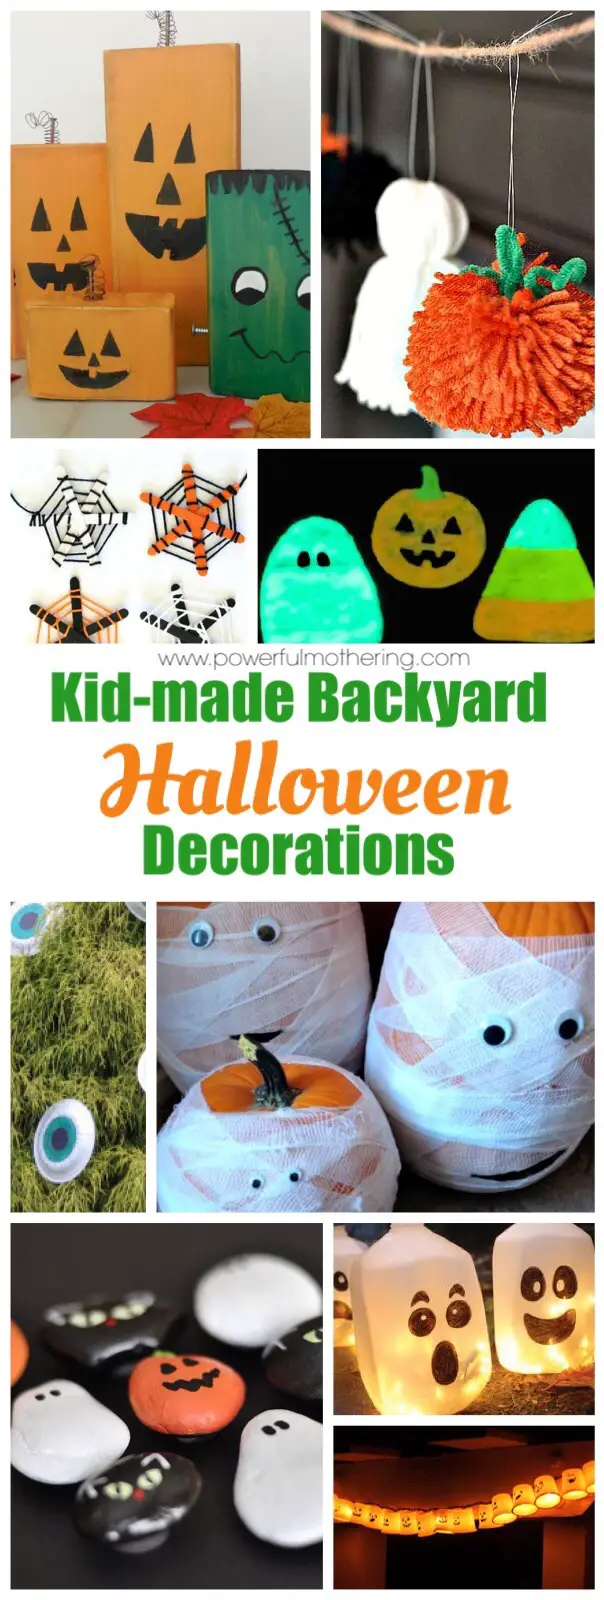 Top 10 Halloween Yard Decoration Crafts for Kids